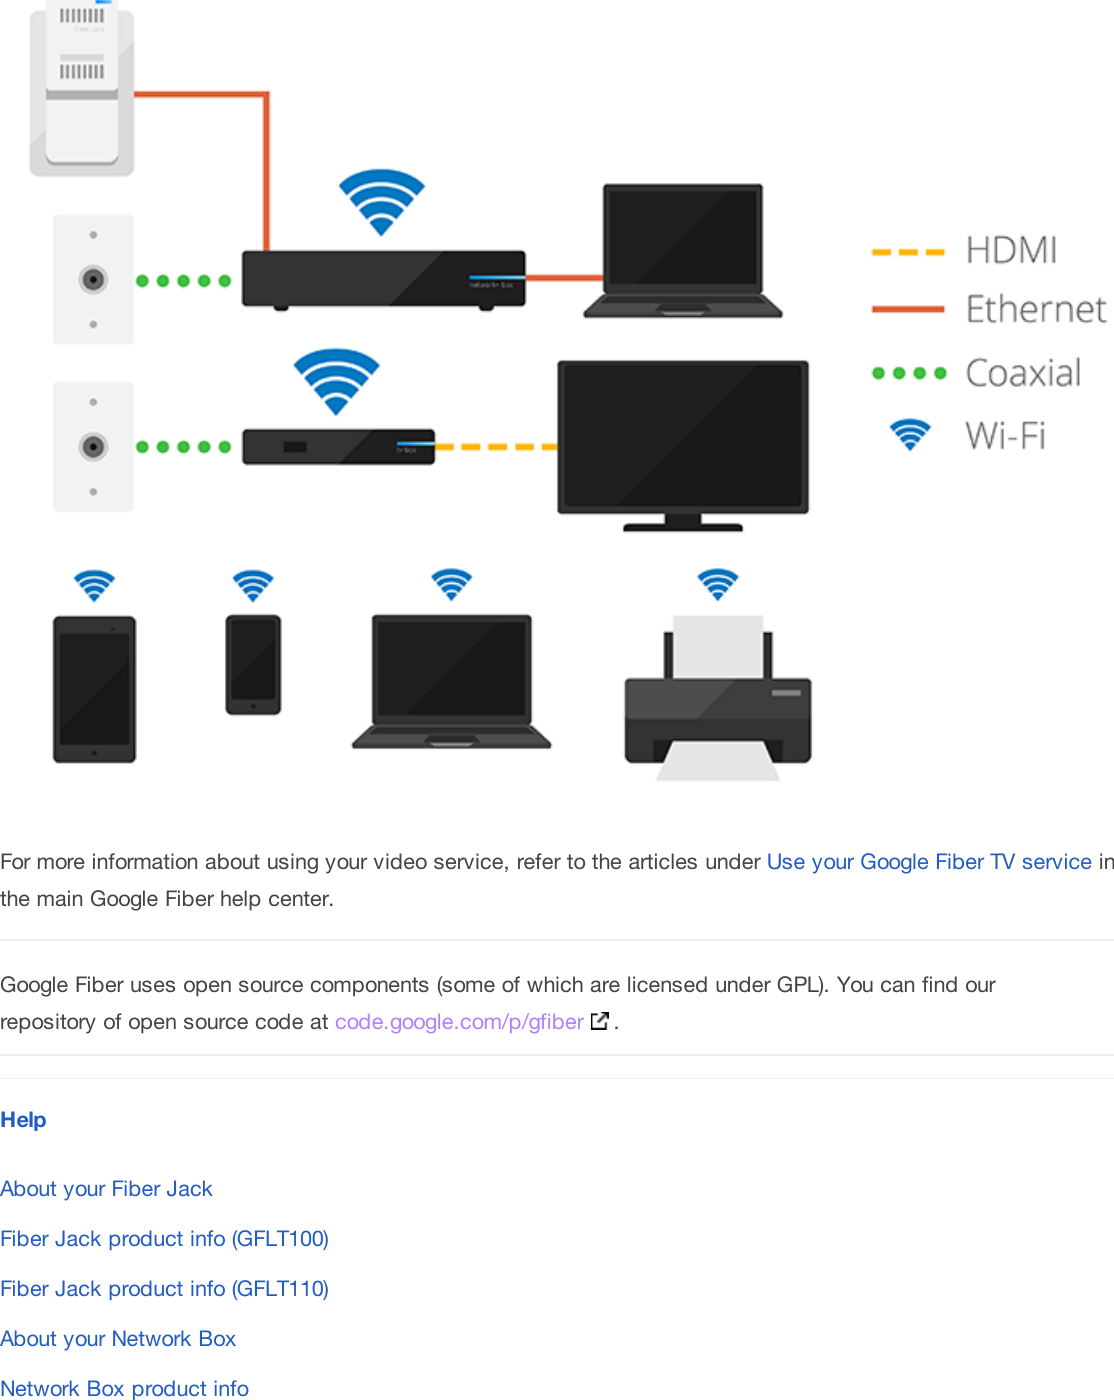 For more information about using your video service, refer to the articles under Use your Google Fiber TV service inthe main Google Fiber help center.Google Fiber uses open source components (some of which are licensed under GPL). You can find ourrepository of open source code at code.google.com/p/gfiber .H elpAbout your Fiber JackFiber Jack product info (GFLT100)Fiber Jack product info (GFLT110)About your Network BoxNetwork Box product infoAbout your TV Box